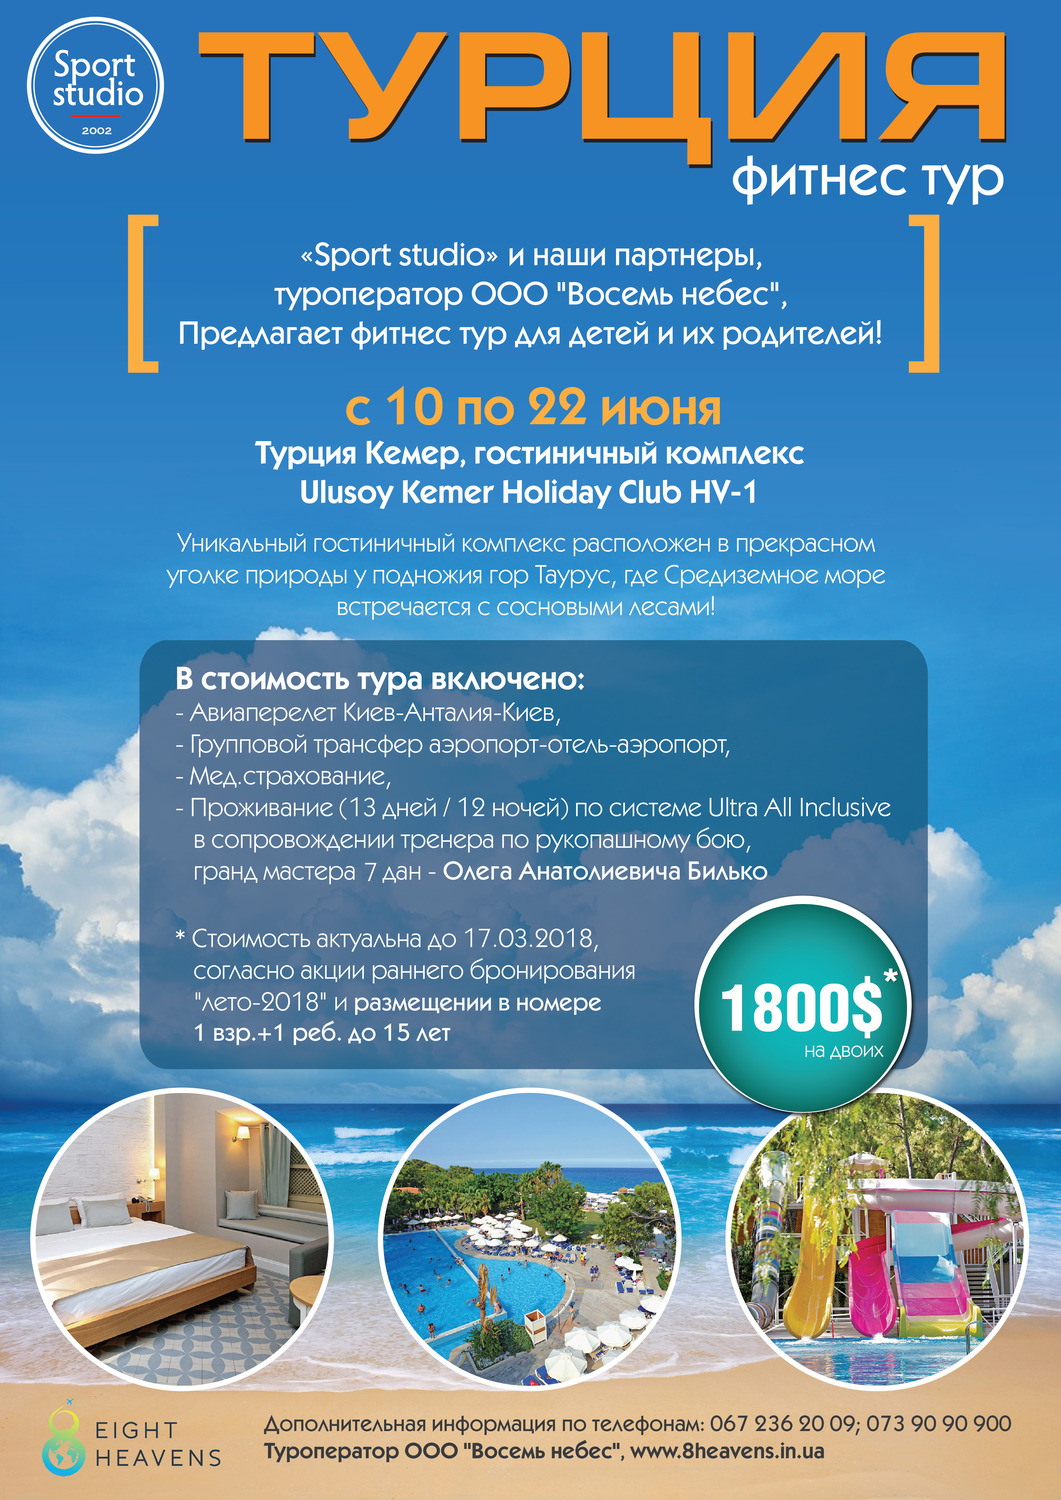 Fitness tour to Kemer with Sport Studio